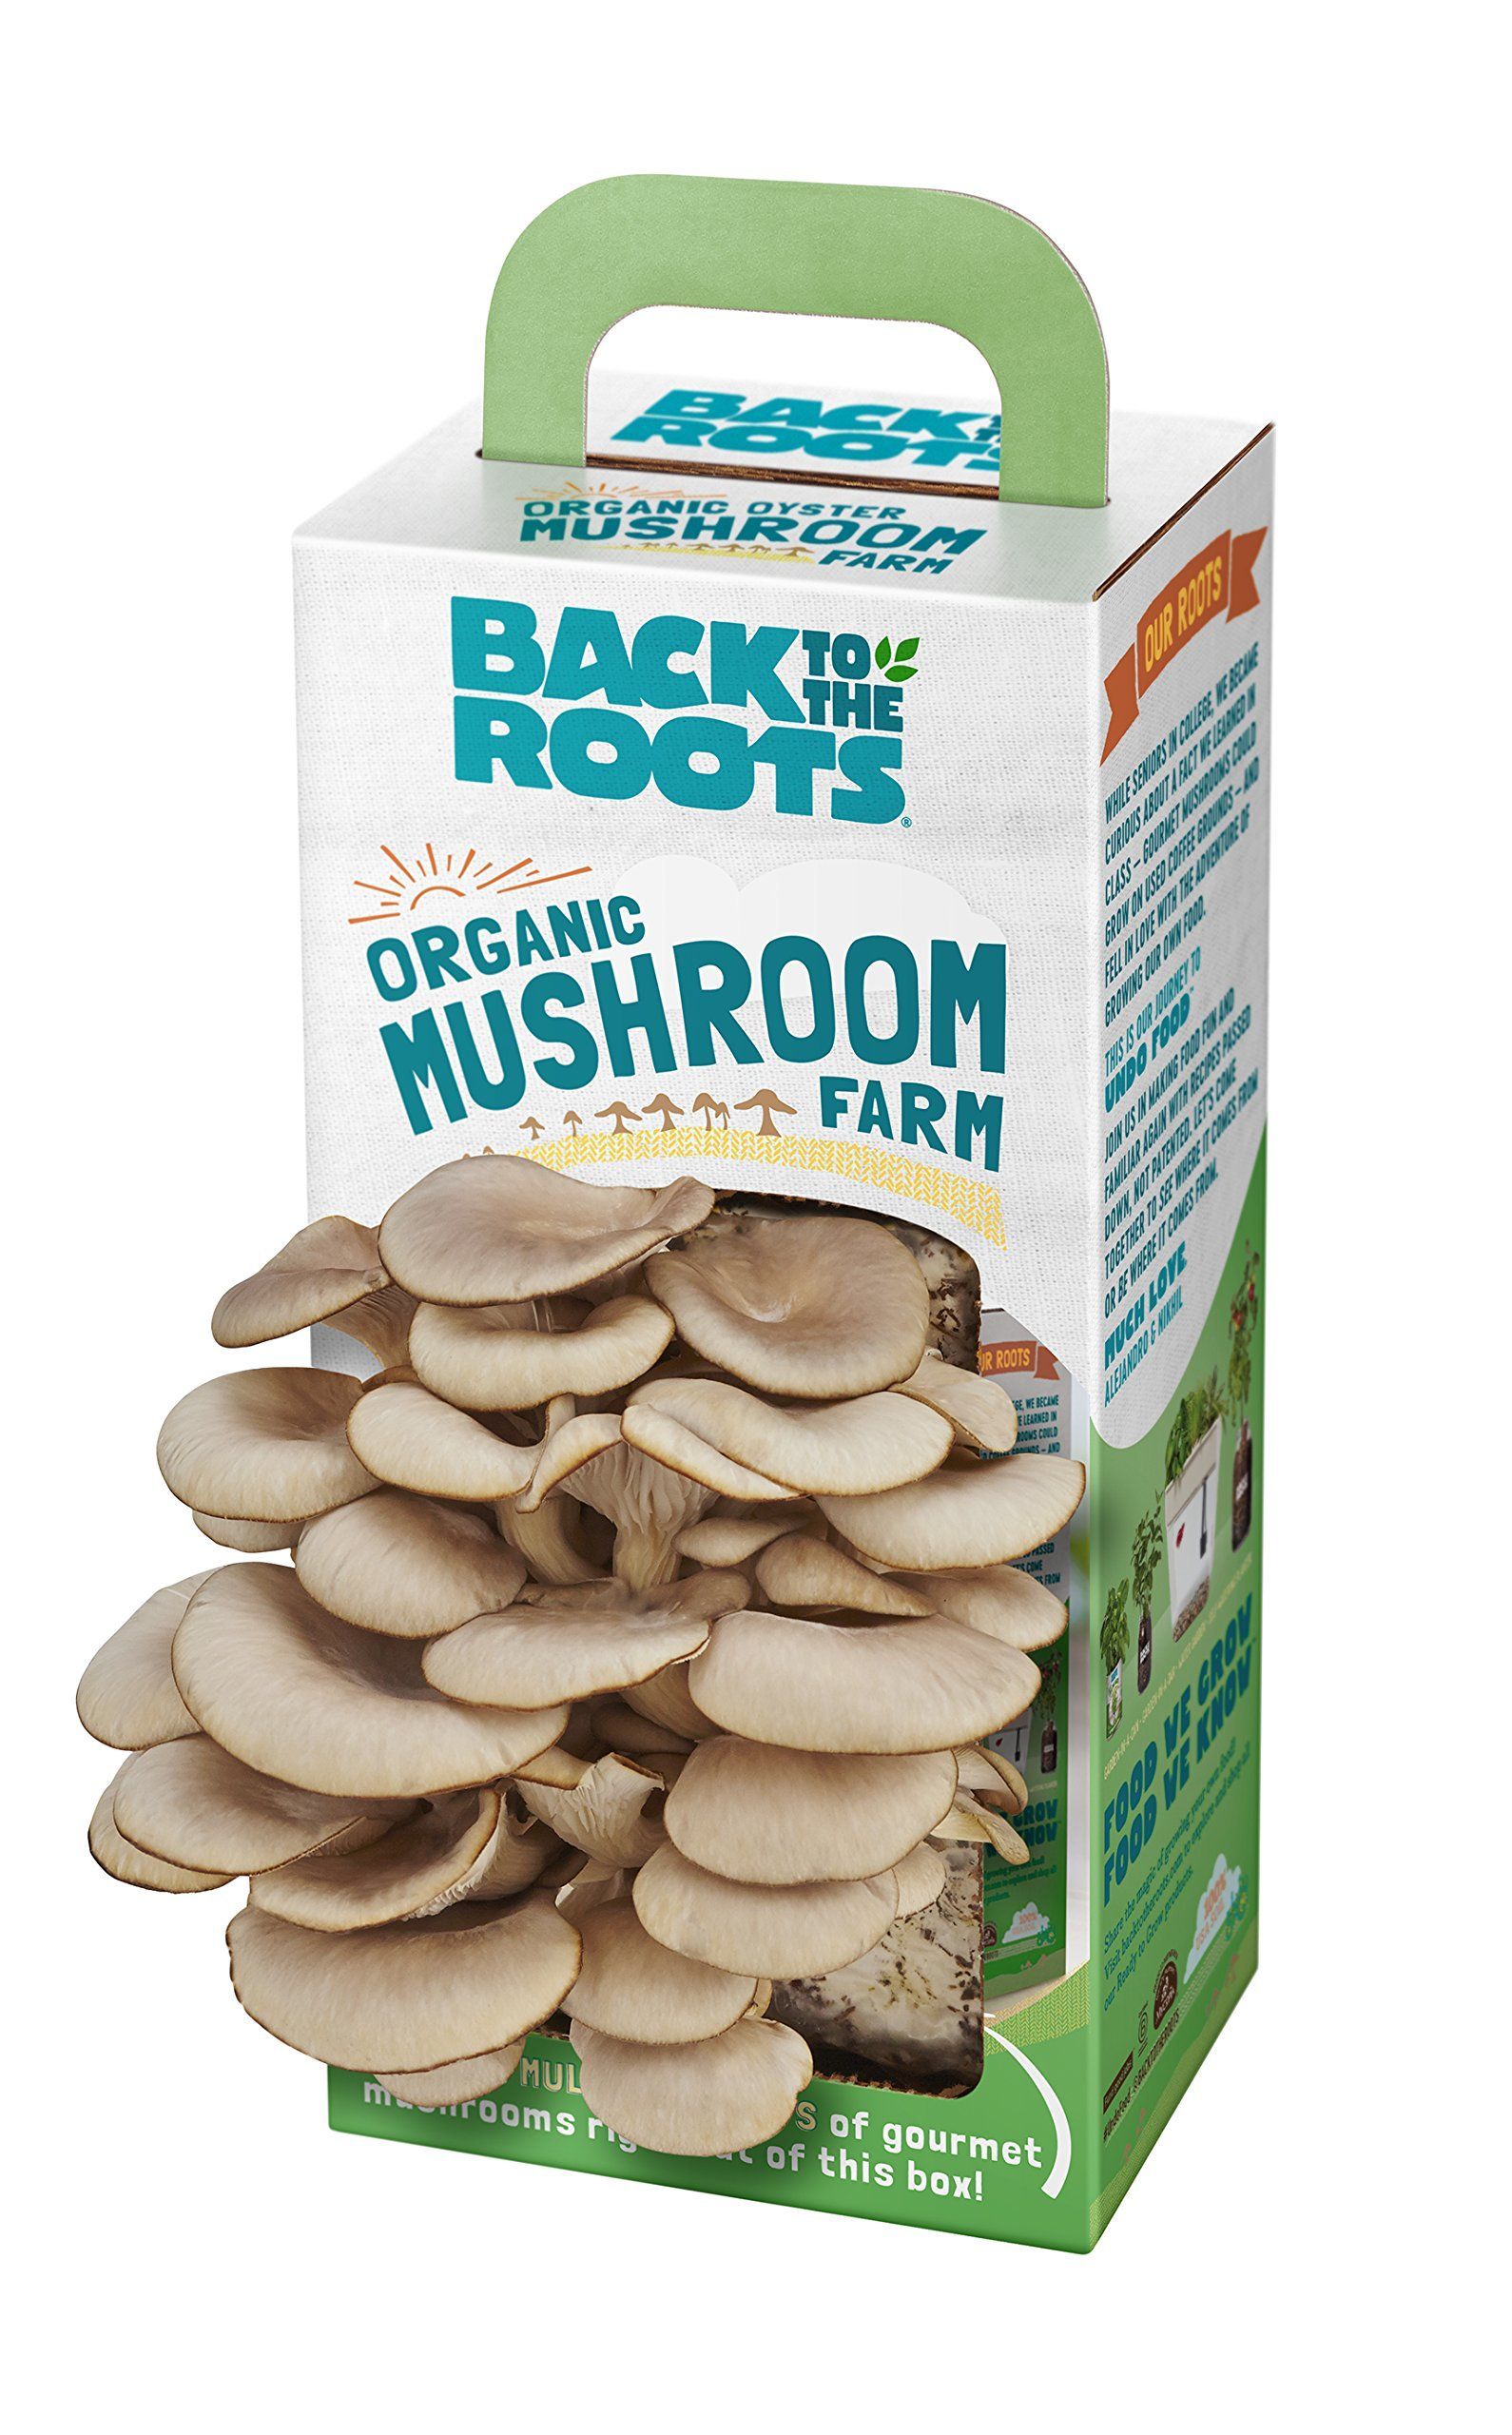 back to the roots mushroom growing kit